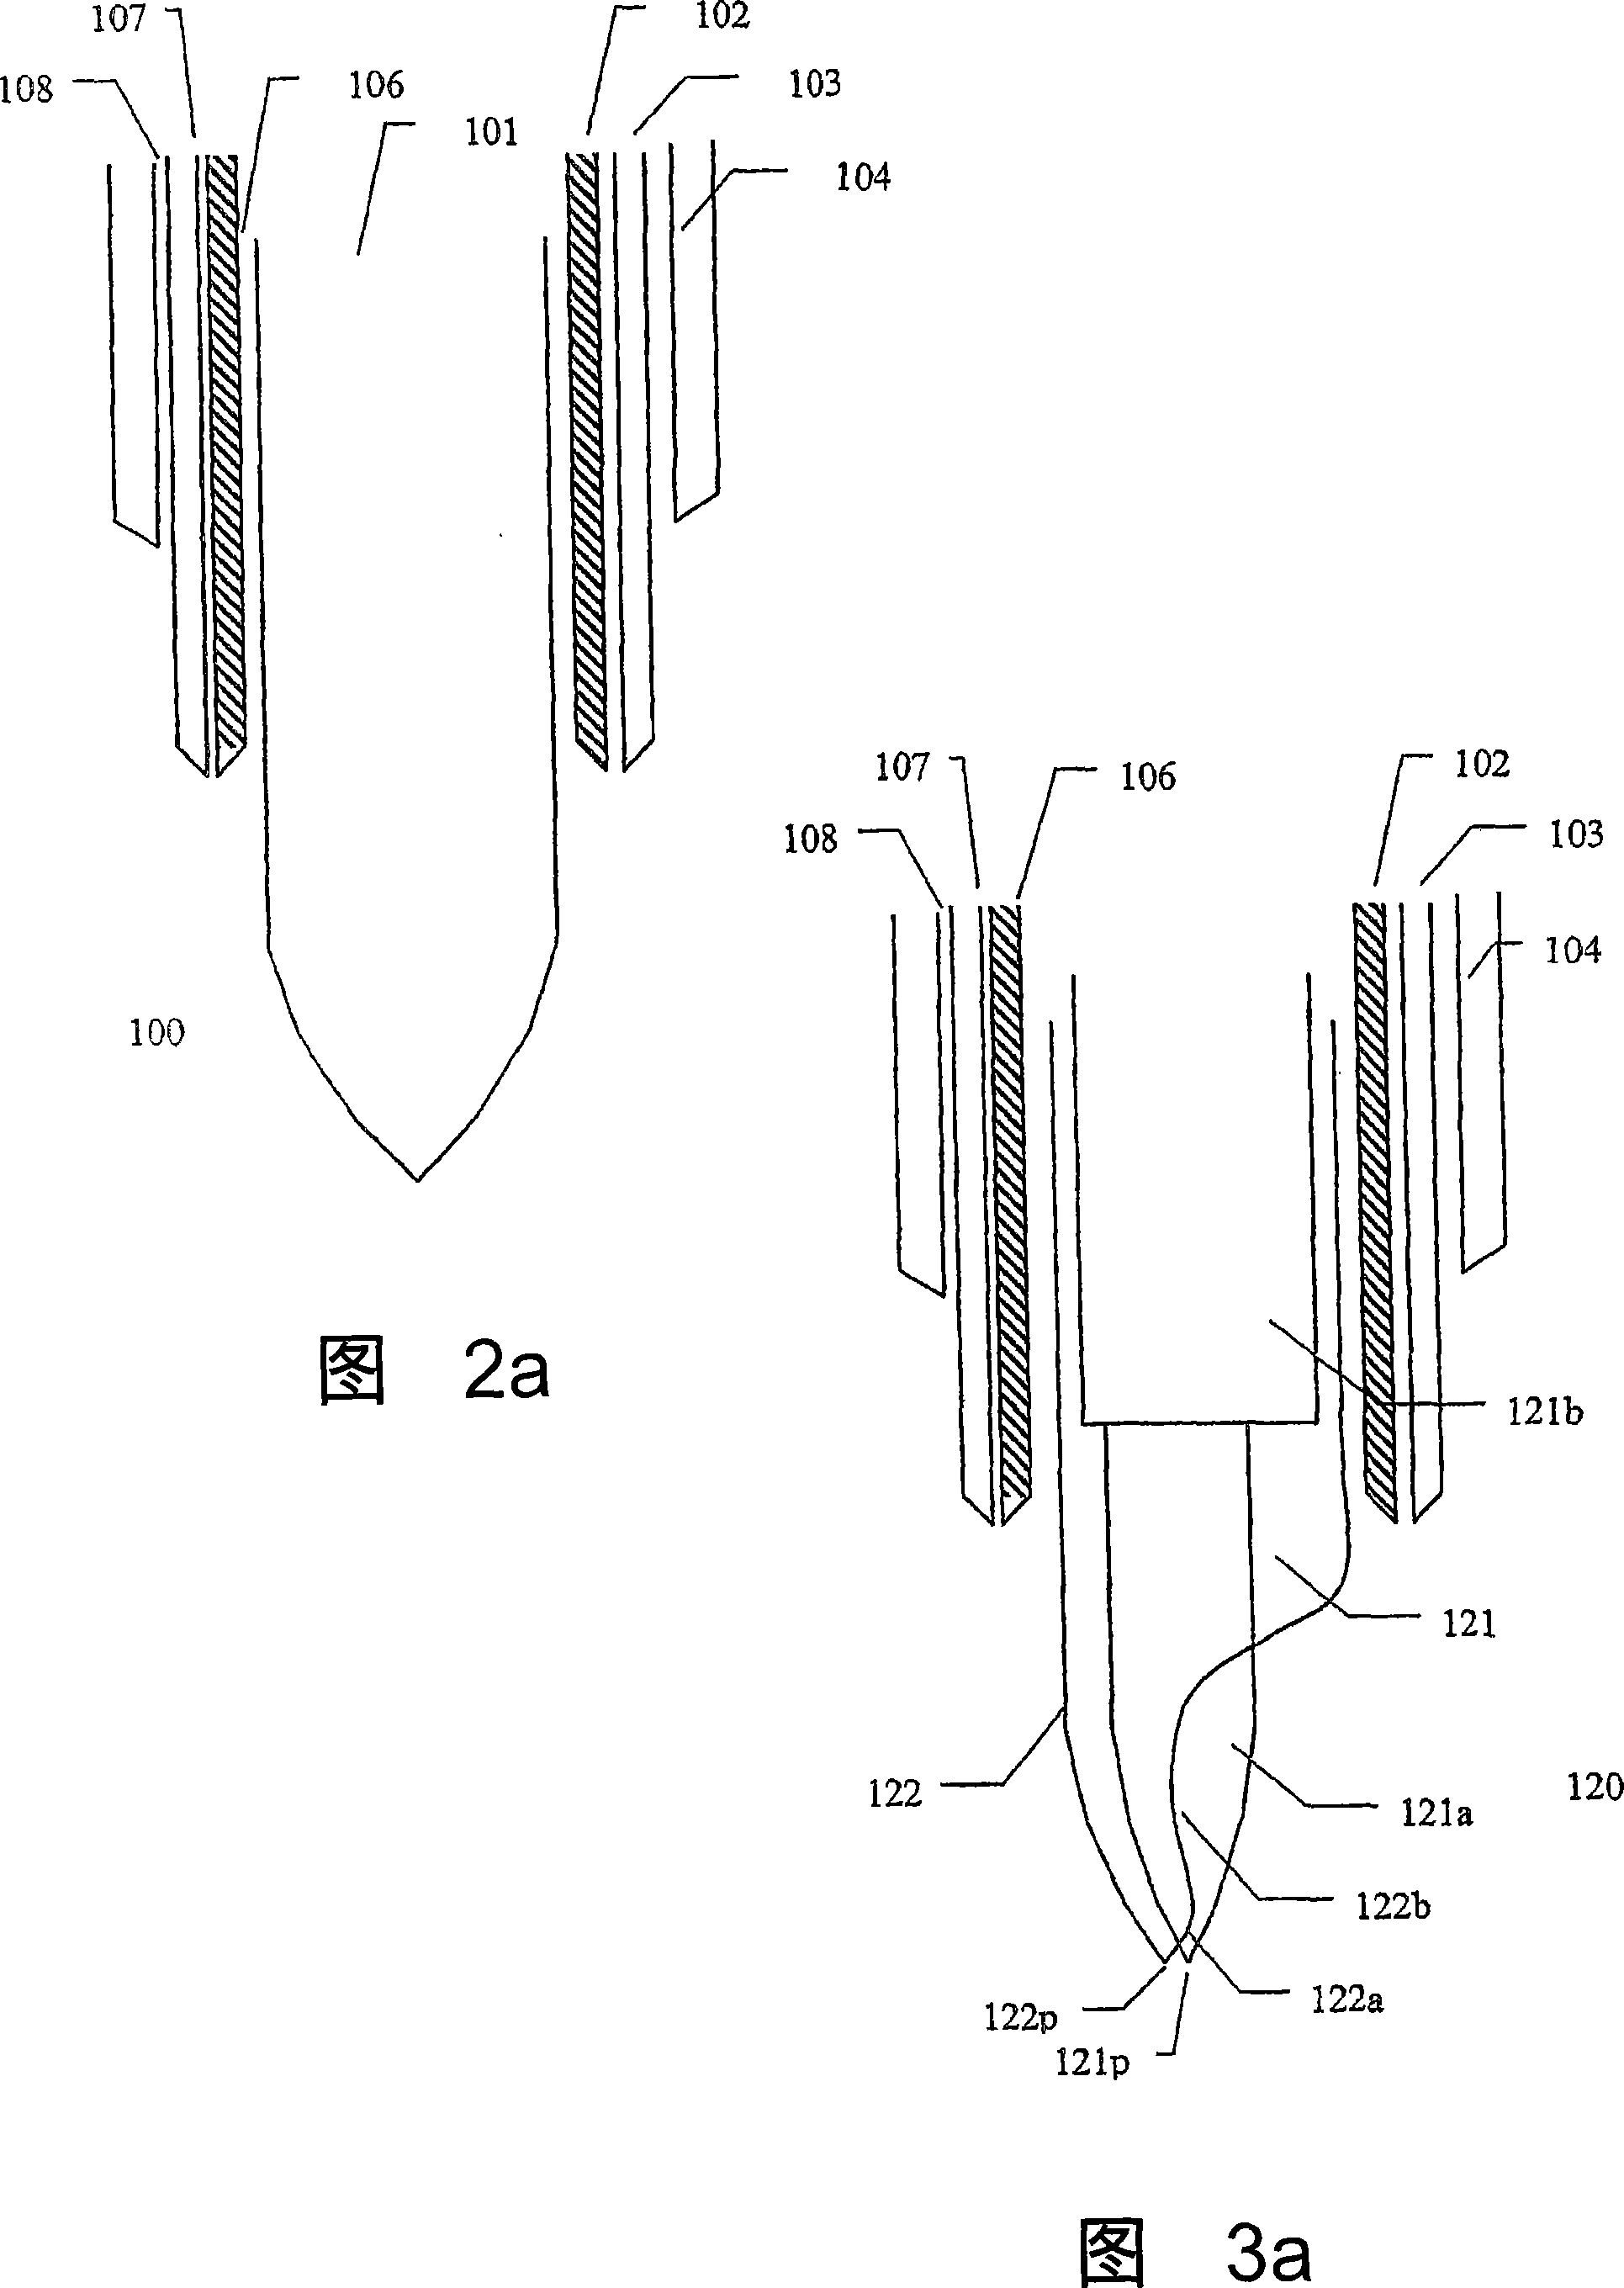 Energy assisted medical devices, systems and methods